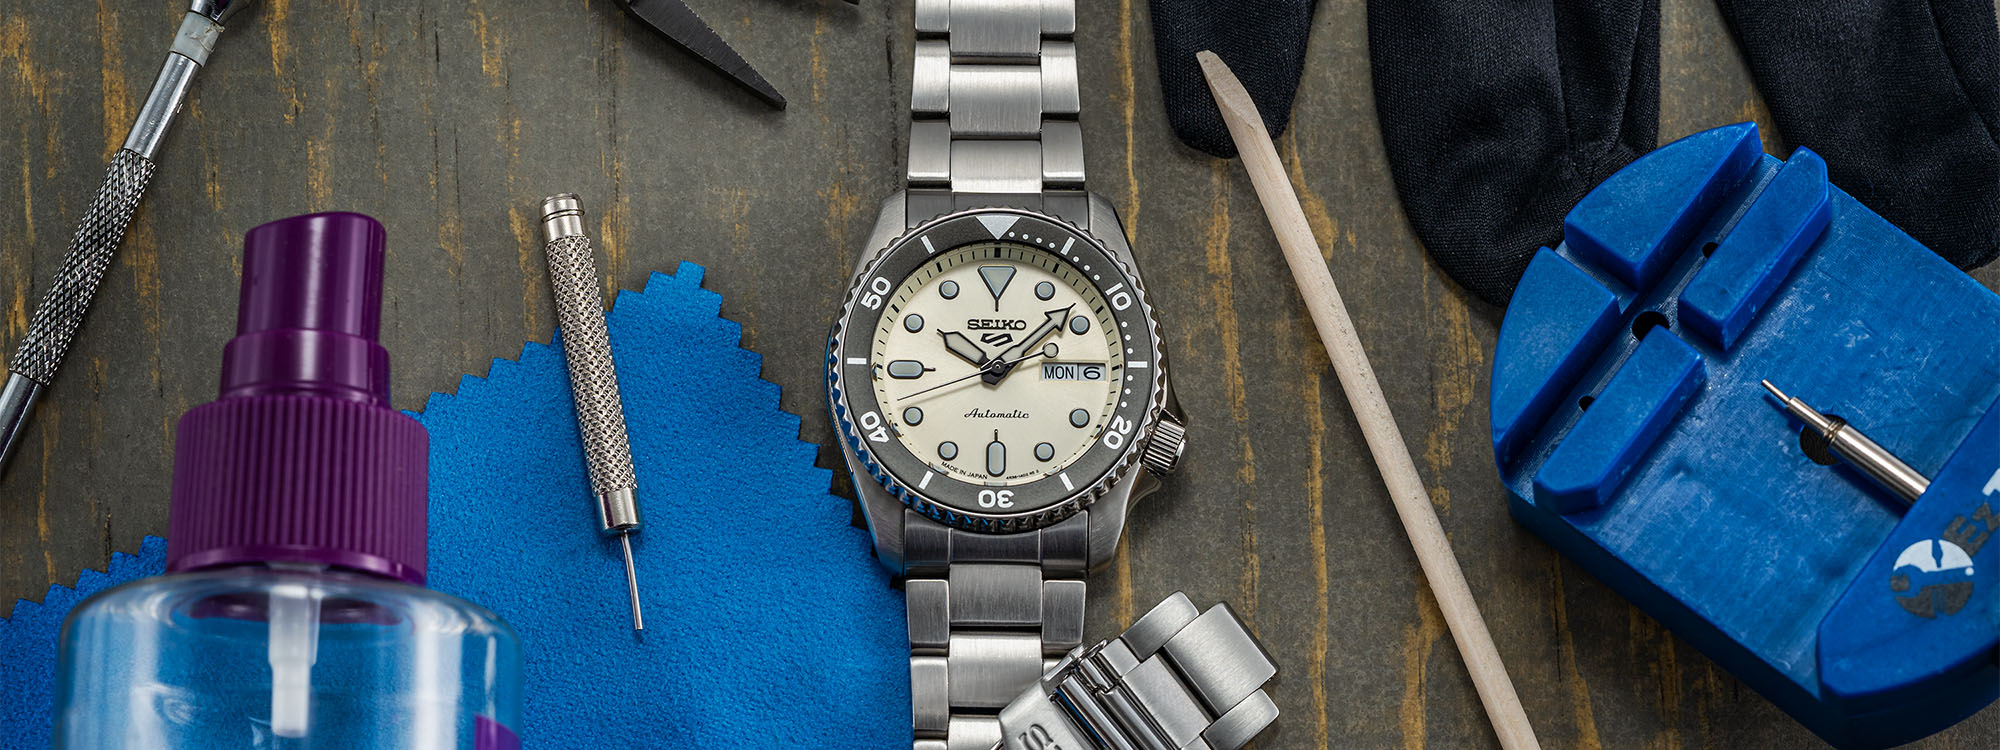 Watch Cleaning 101: How to Keep Your Watch Looking Sharp Between Servi